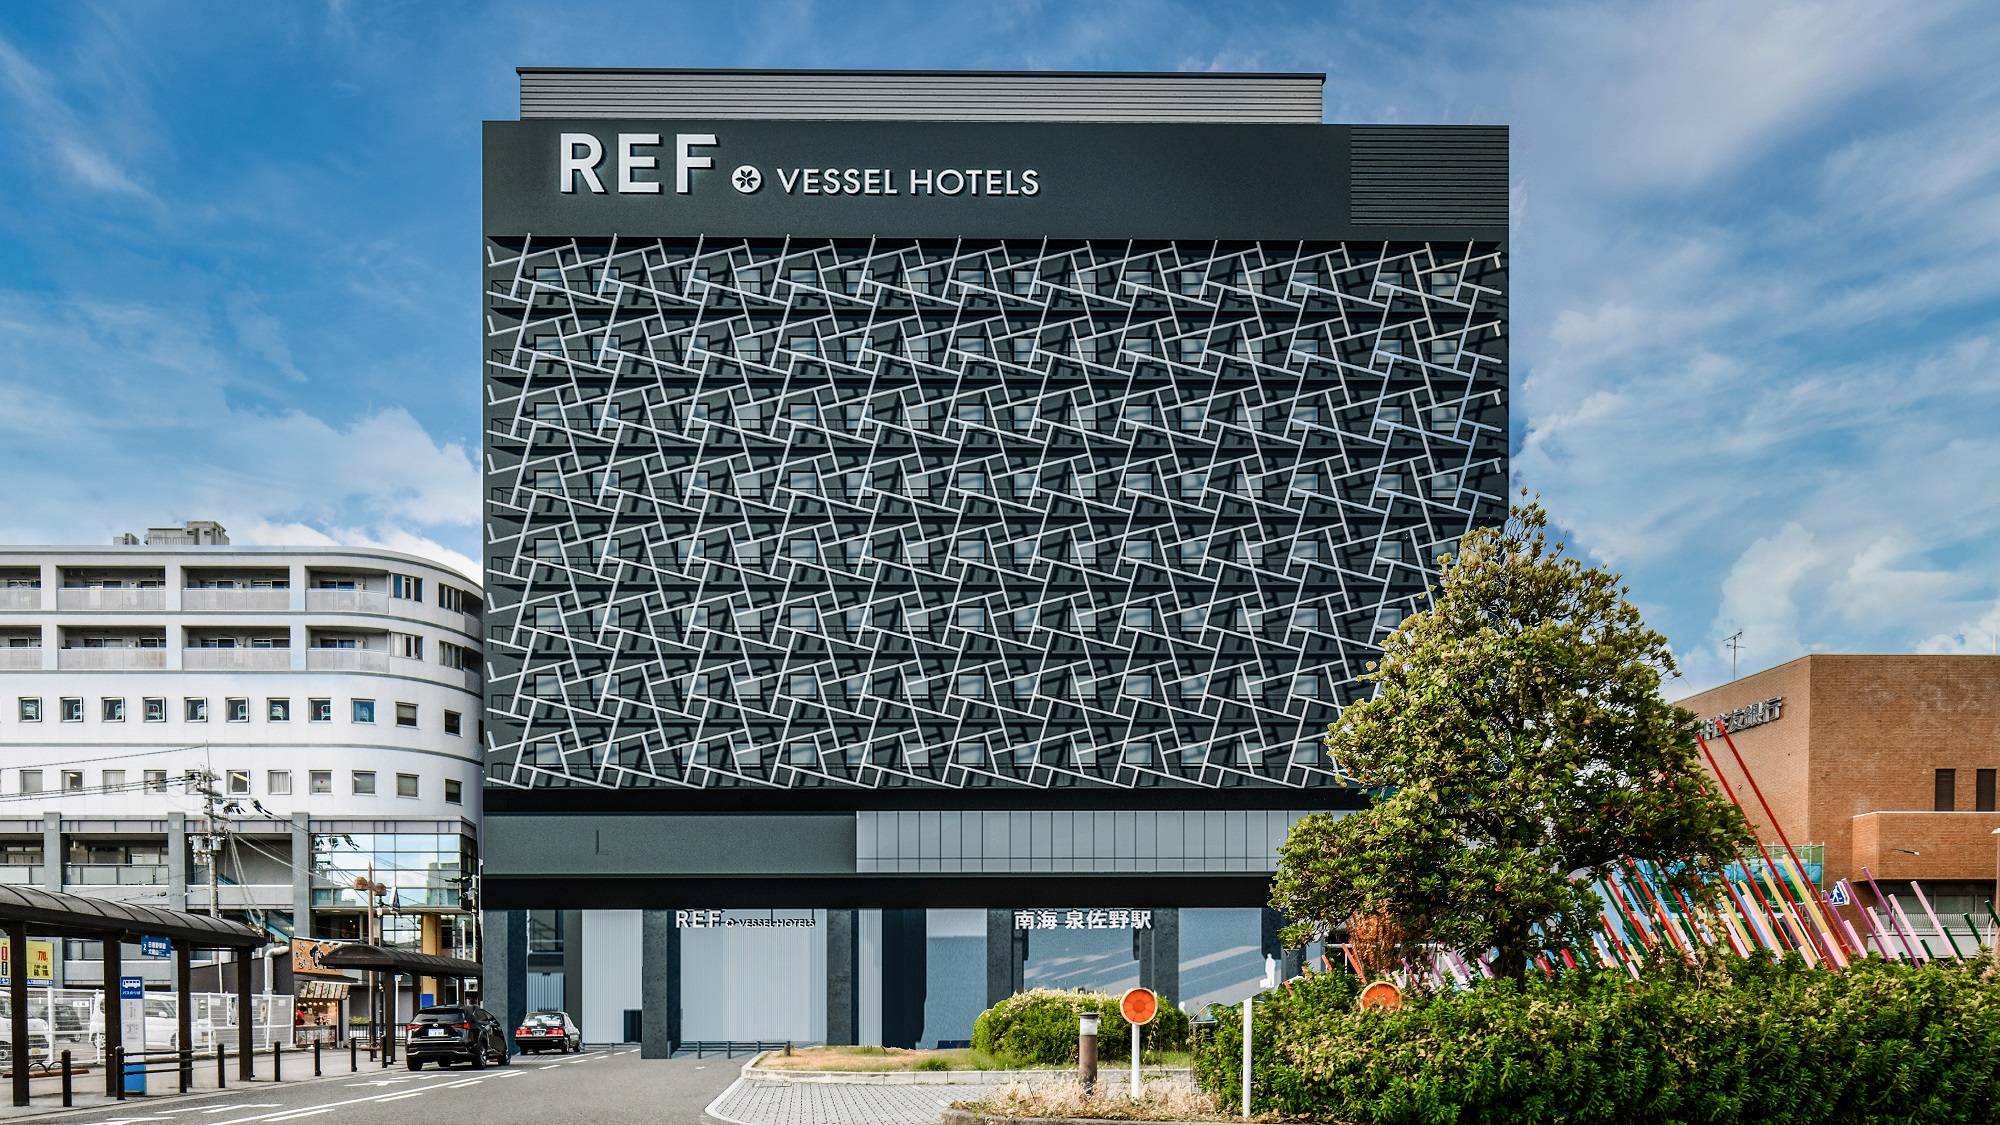 REF关西机场by Vessel Hotels